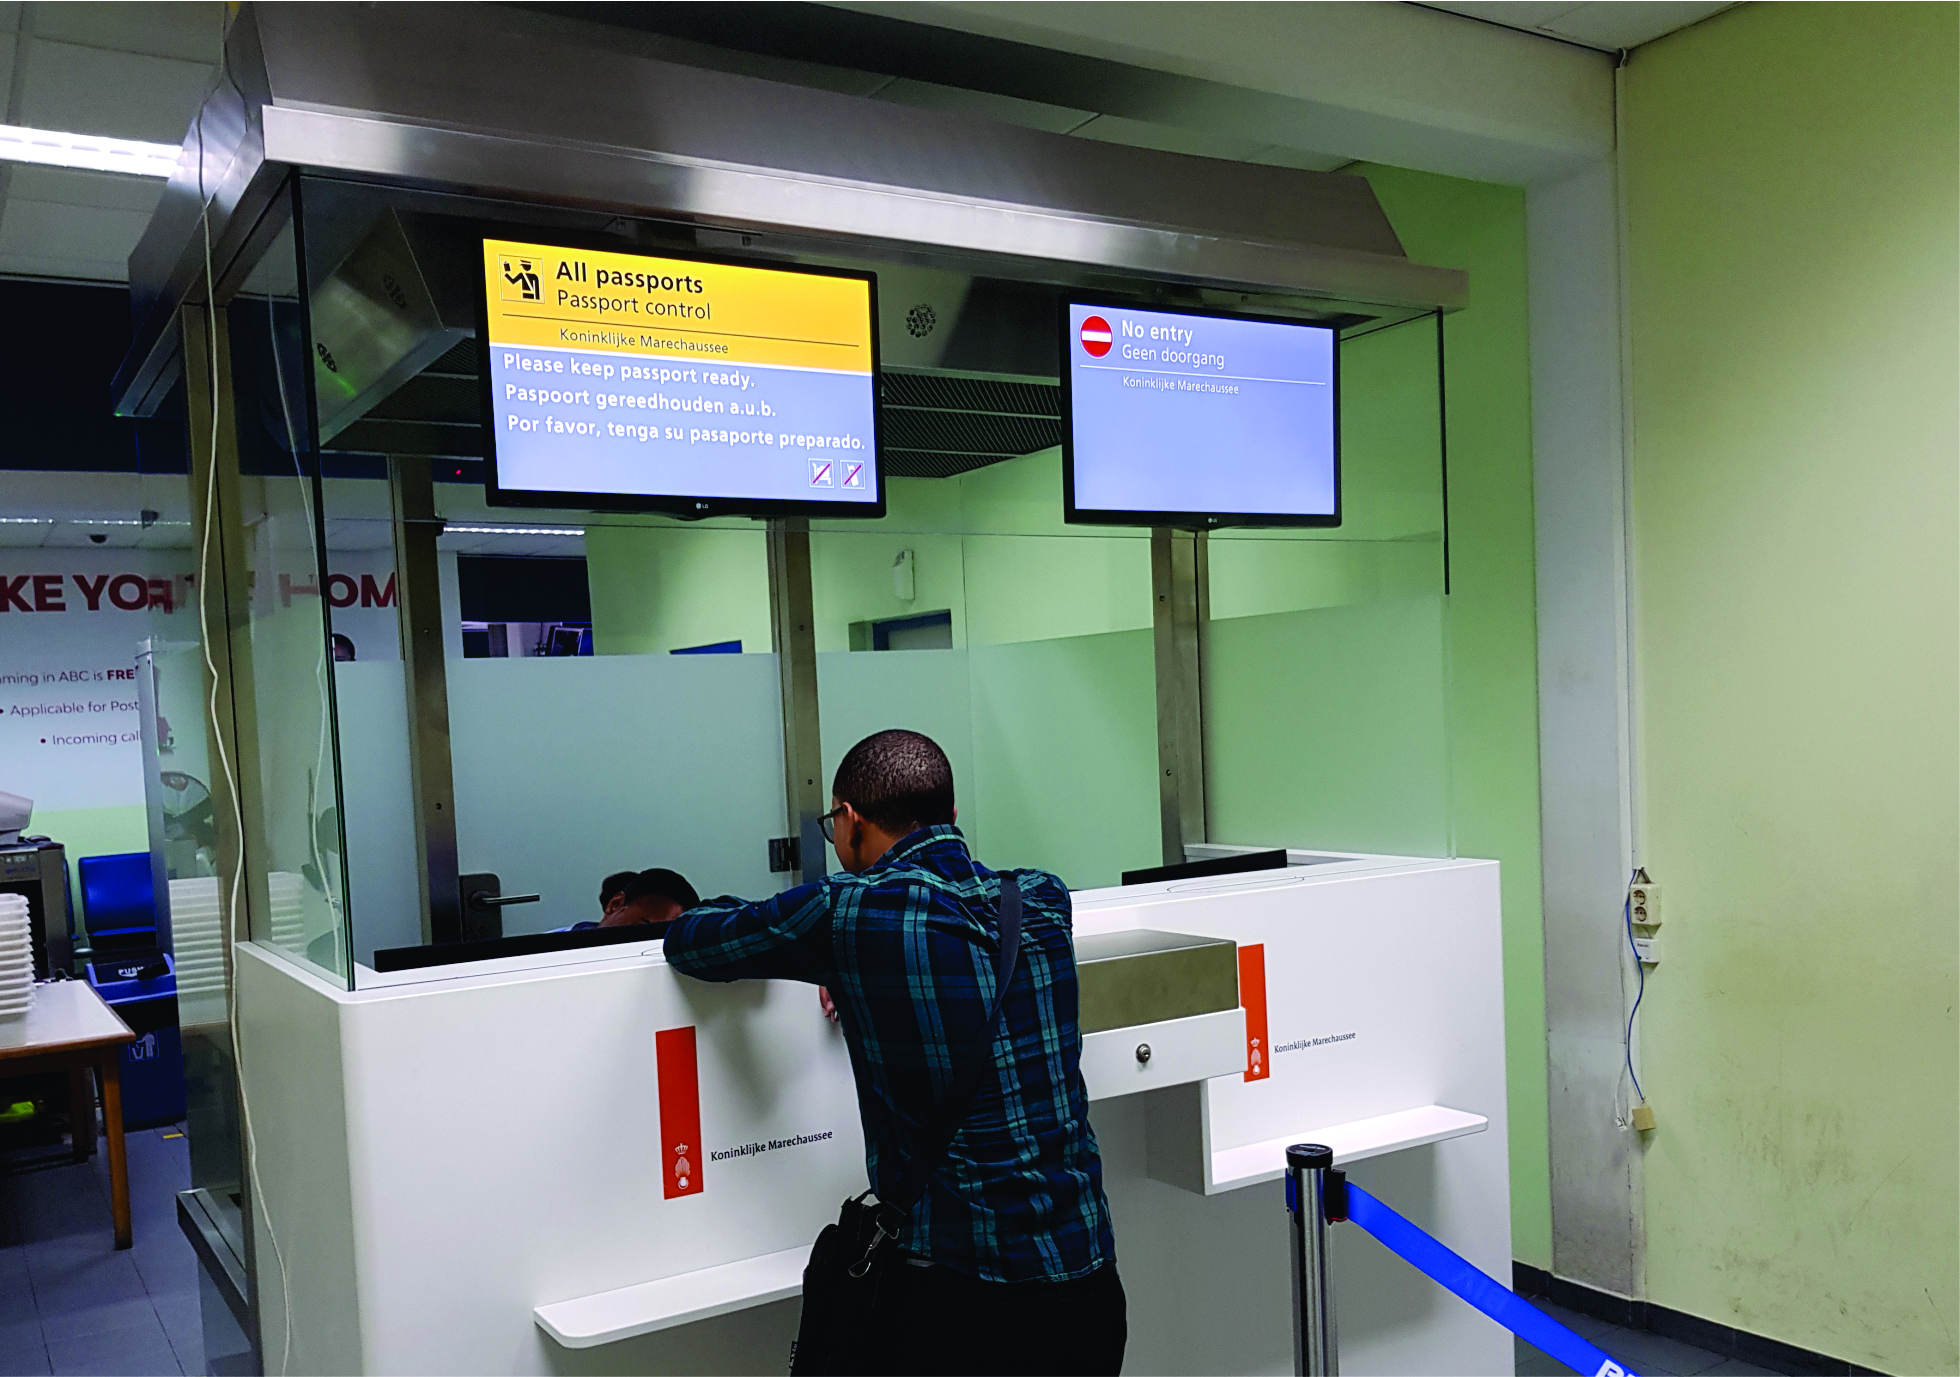 New immigration counters at BIA